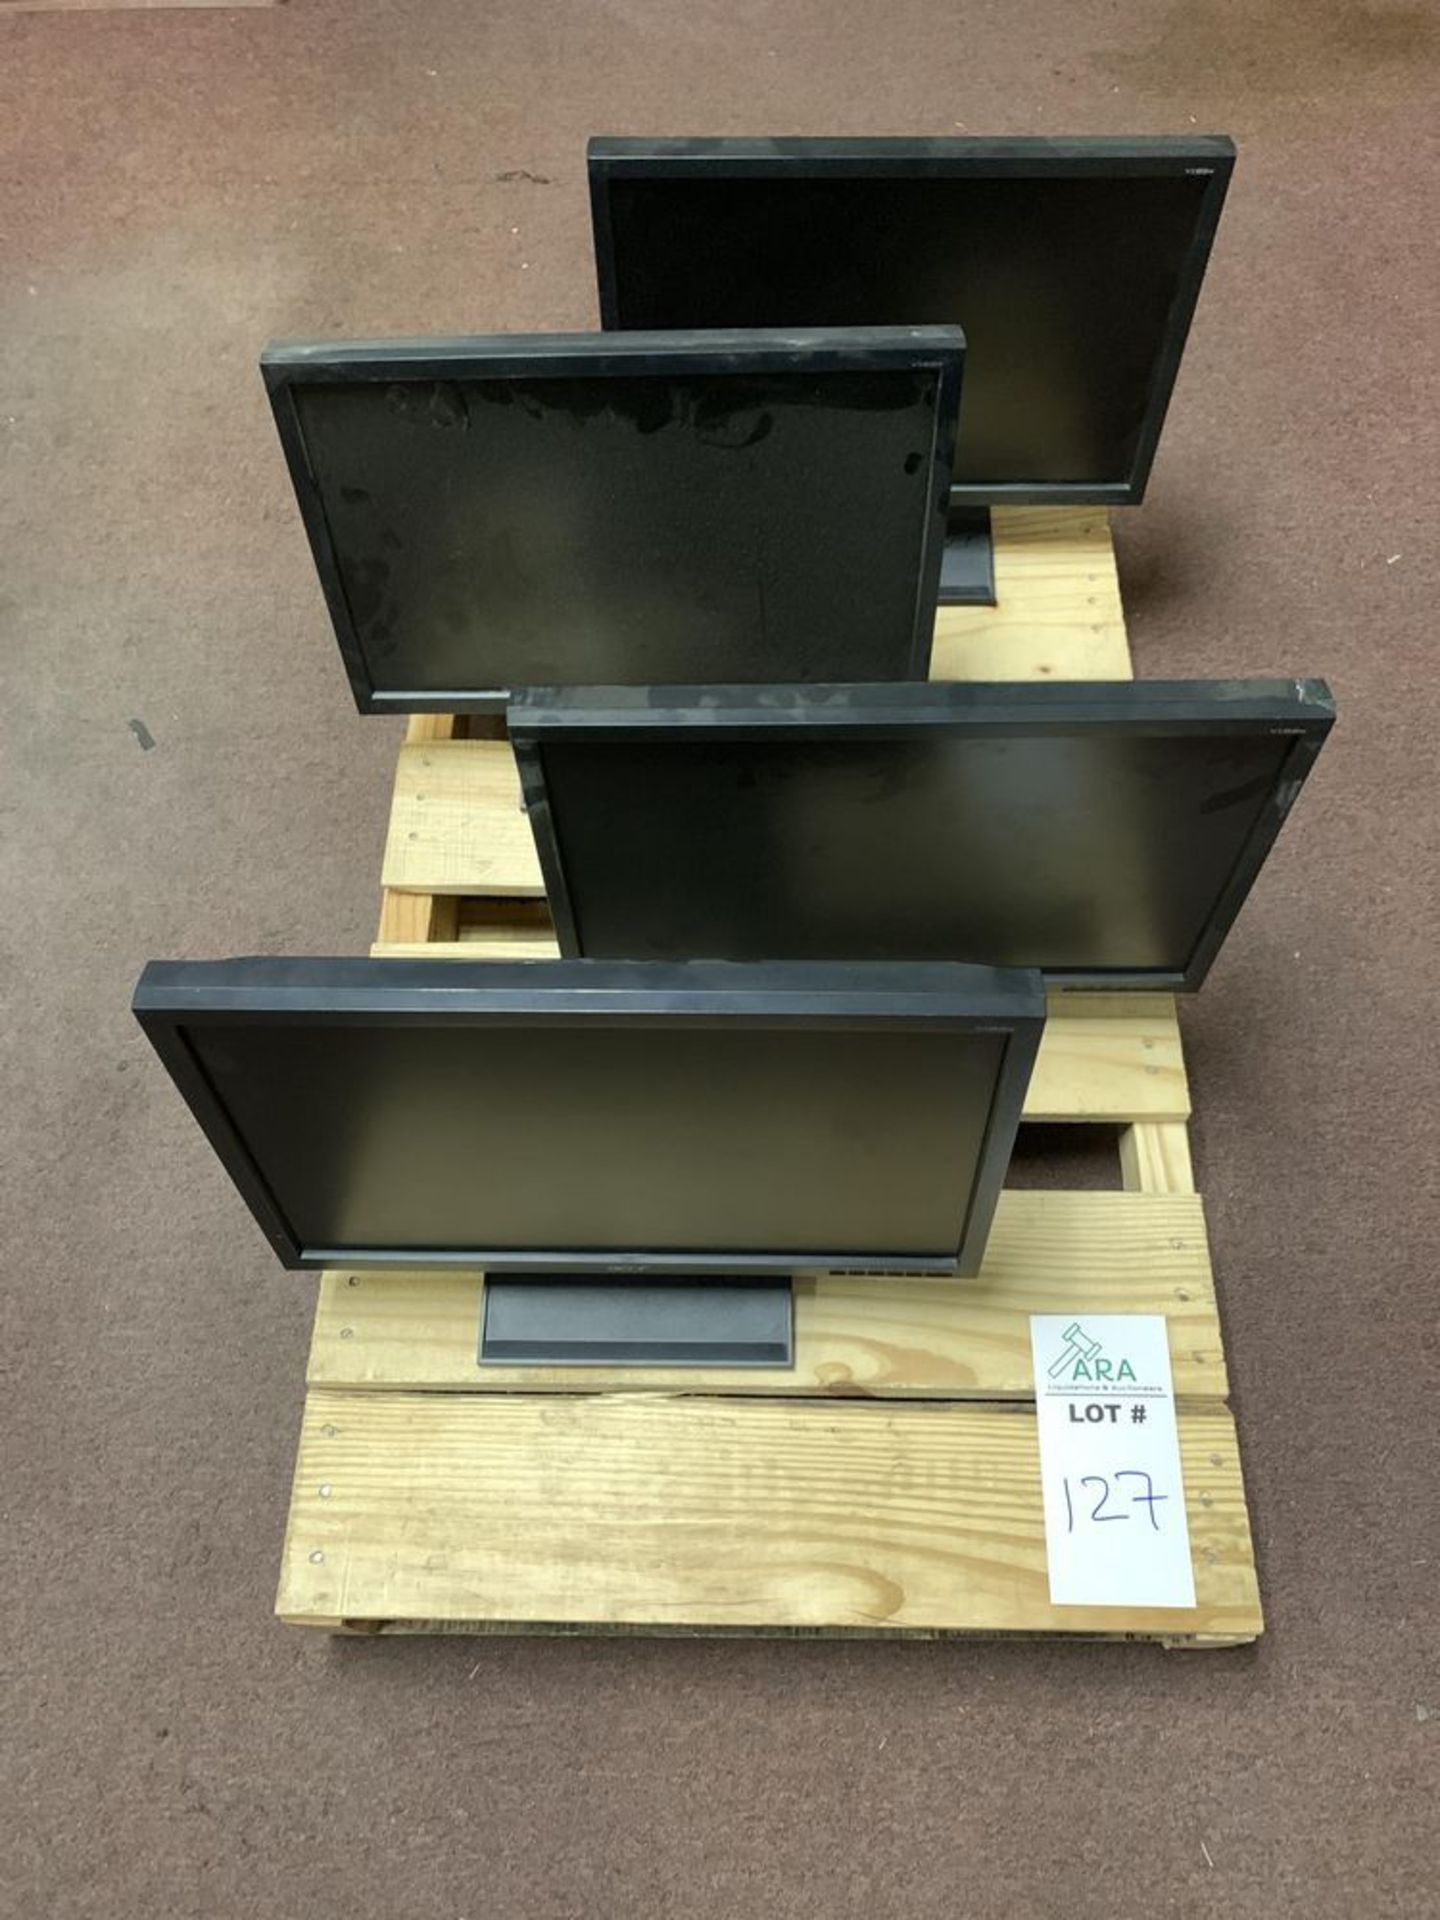 4 ACER V193W MONITORS. ALL ITEMS ARE SOLD AS IS UNTESTED BUT CAME FROM A WORKING ENVIRONMENT. NOT - Image 2 of 3